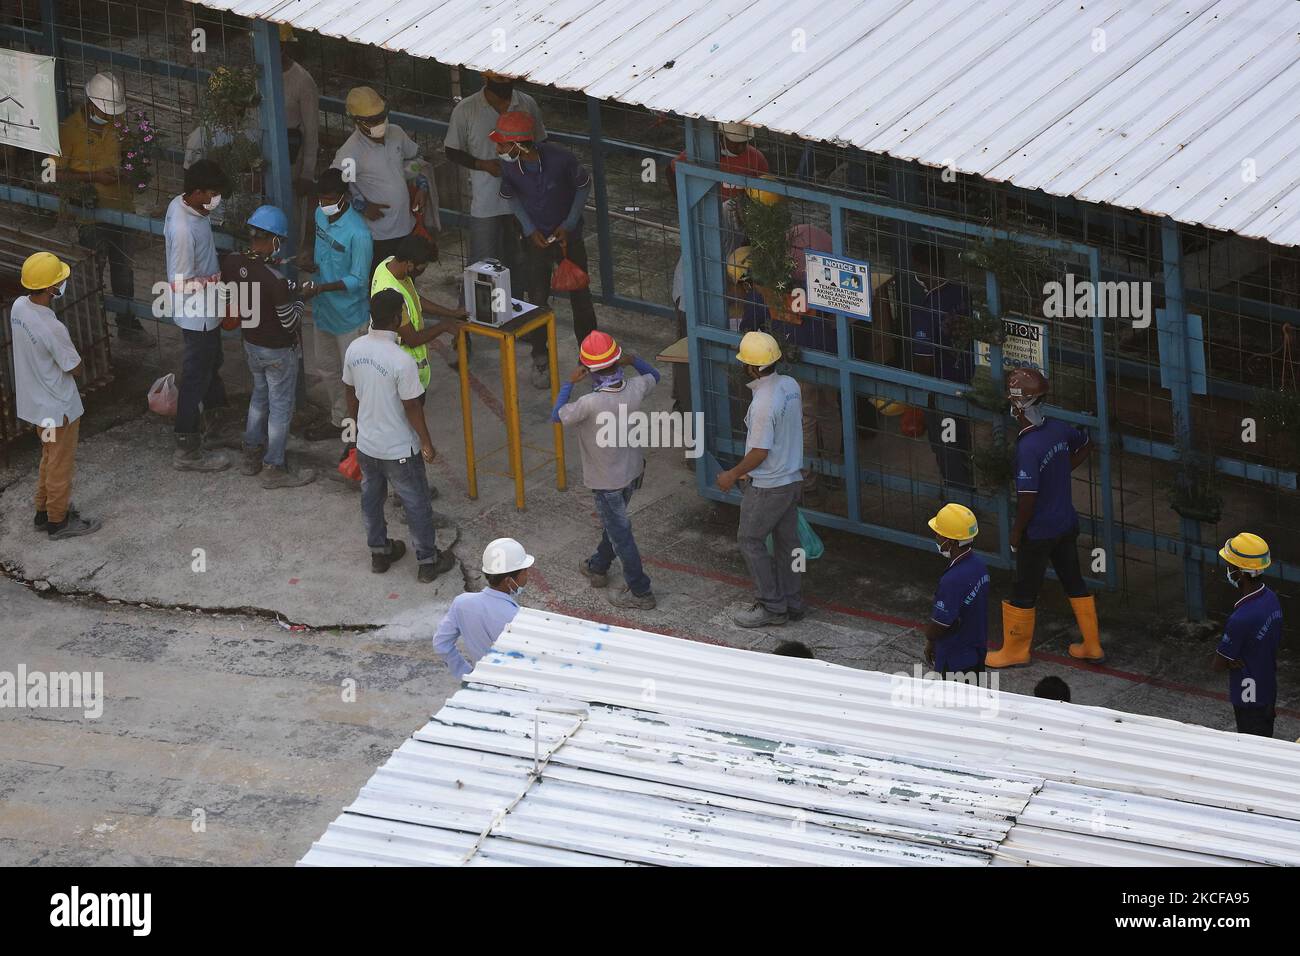 Migrant workers queue to enter a building construction site on May 28, 2021 in Singapore. Singapore enters a month long heightened alert from May 16 to June 13 to curb the spread of COVID-19 cases in the local community. New restrictions on movements and activities have been introduced such as limiting social interaction to two, prohibiting dining out and a reduced operating capacity at shopping malls, offices and attractions. On May 17, the construction industry stakeholders appealed to Multi-Ministry Taskforce to bring in foreign workers in a safe and controlled manner after the built enviro Stock Photo